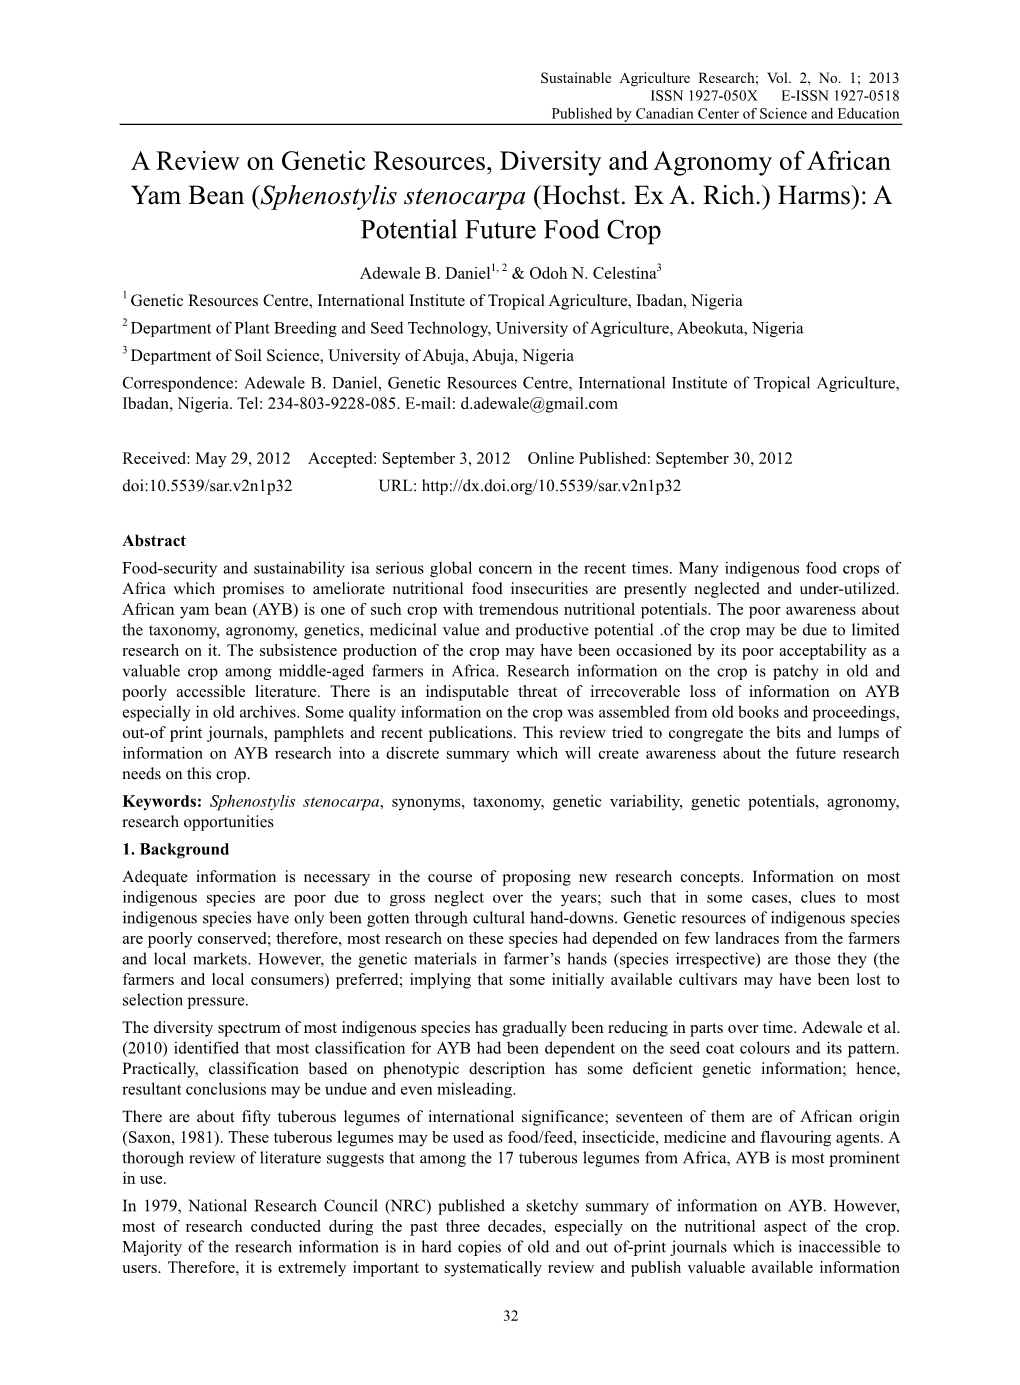 (Sphenostylis Stenocarpa (Hochst. Ex A. Rich.) Harms): a Potential Future Food Crop